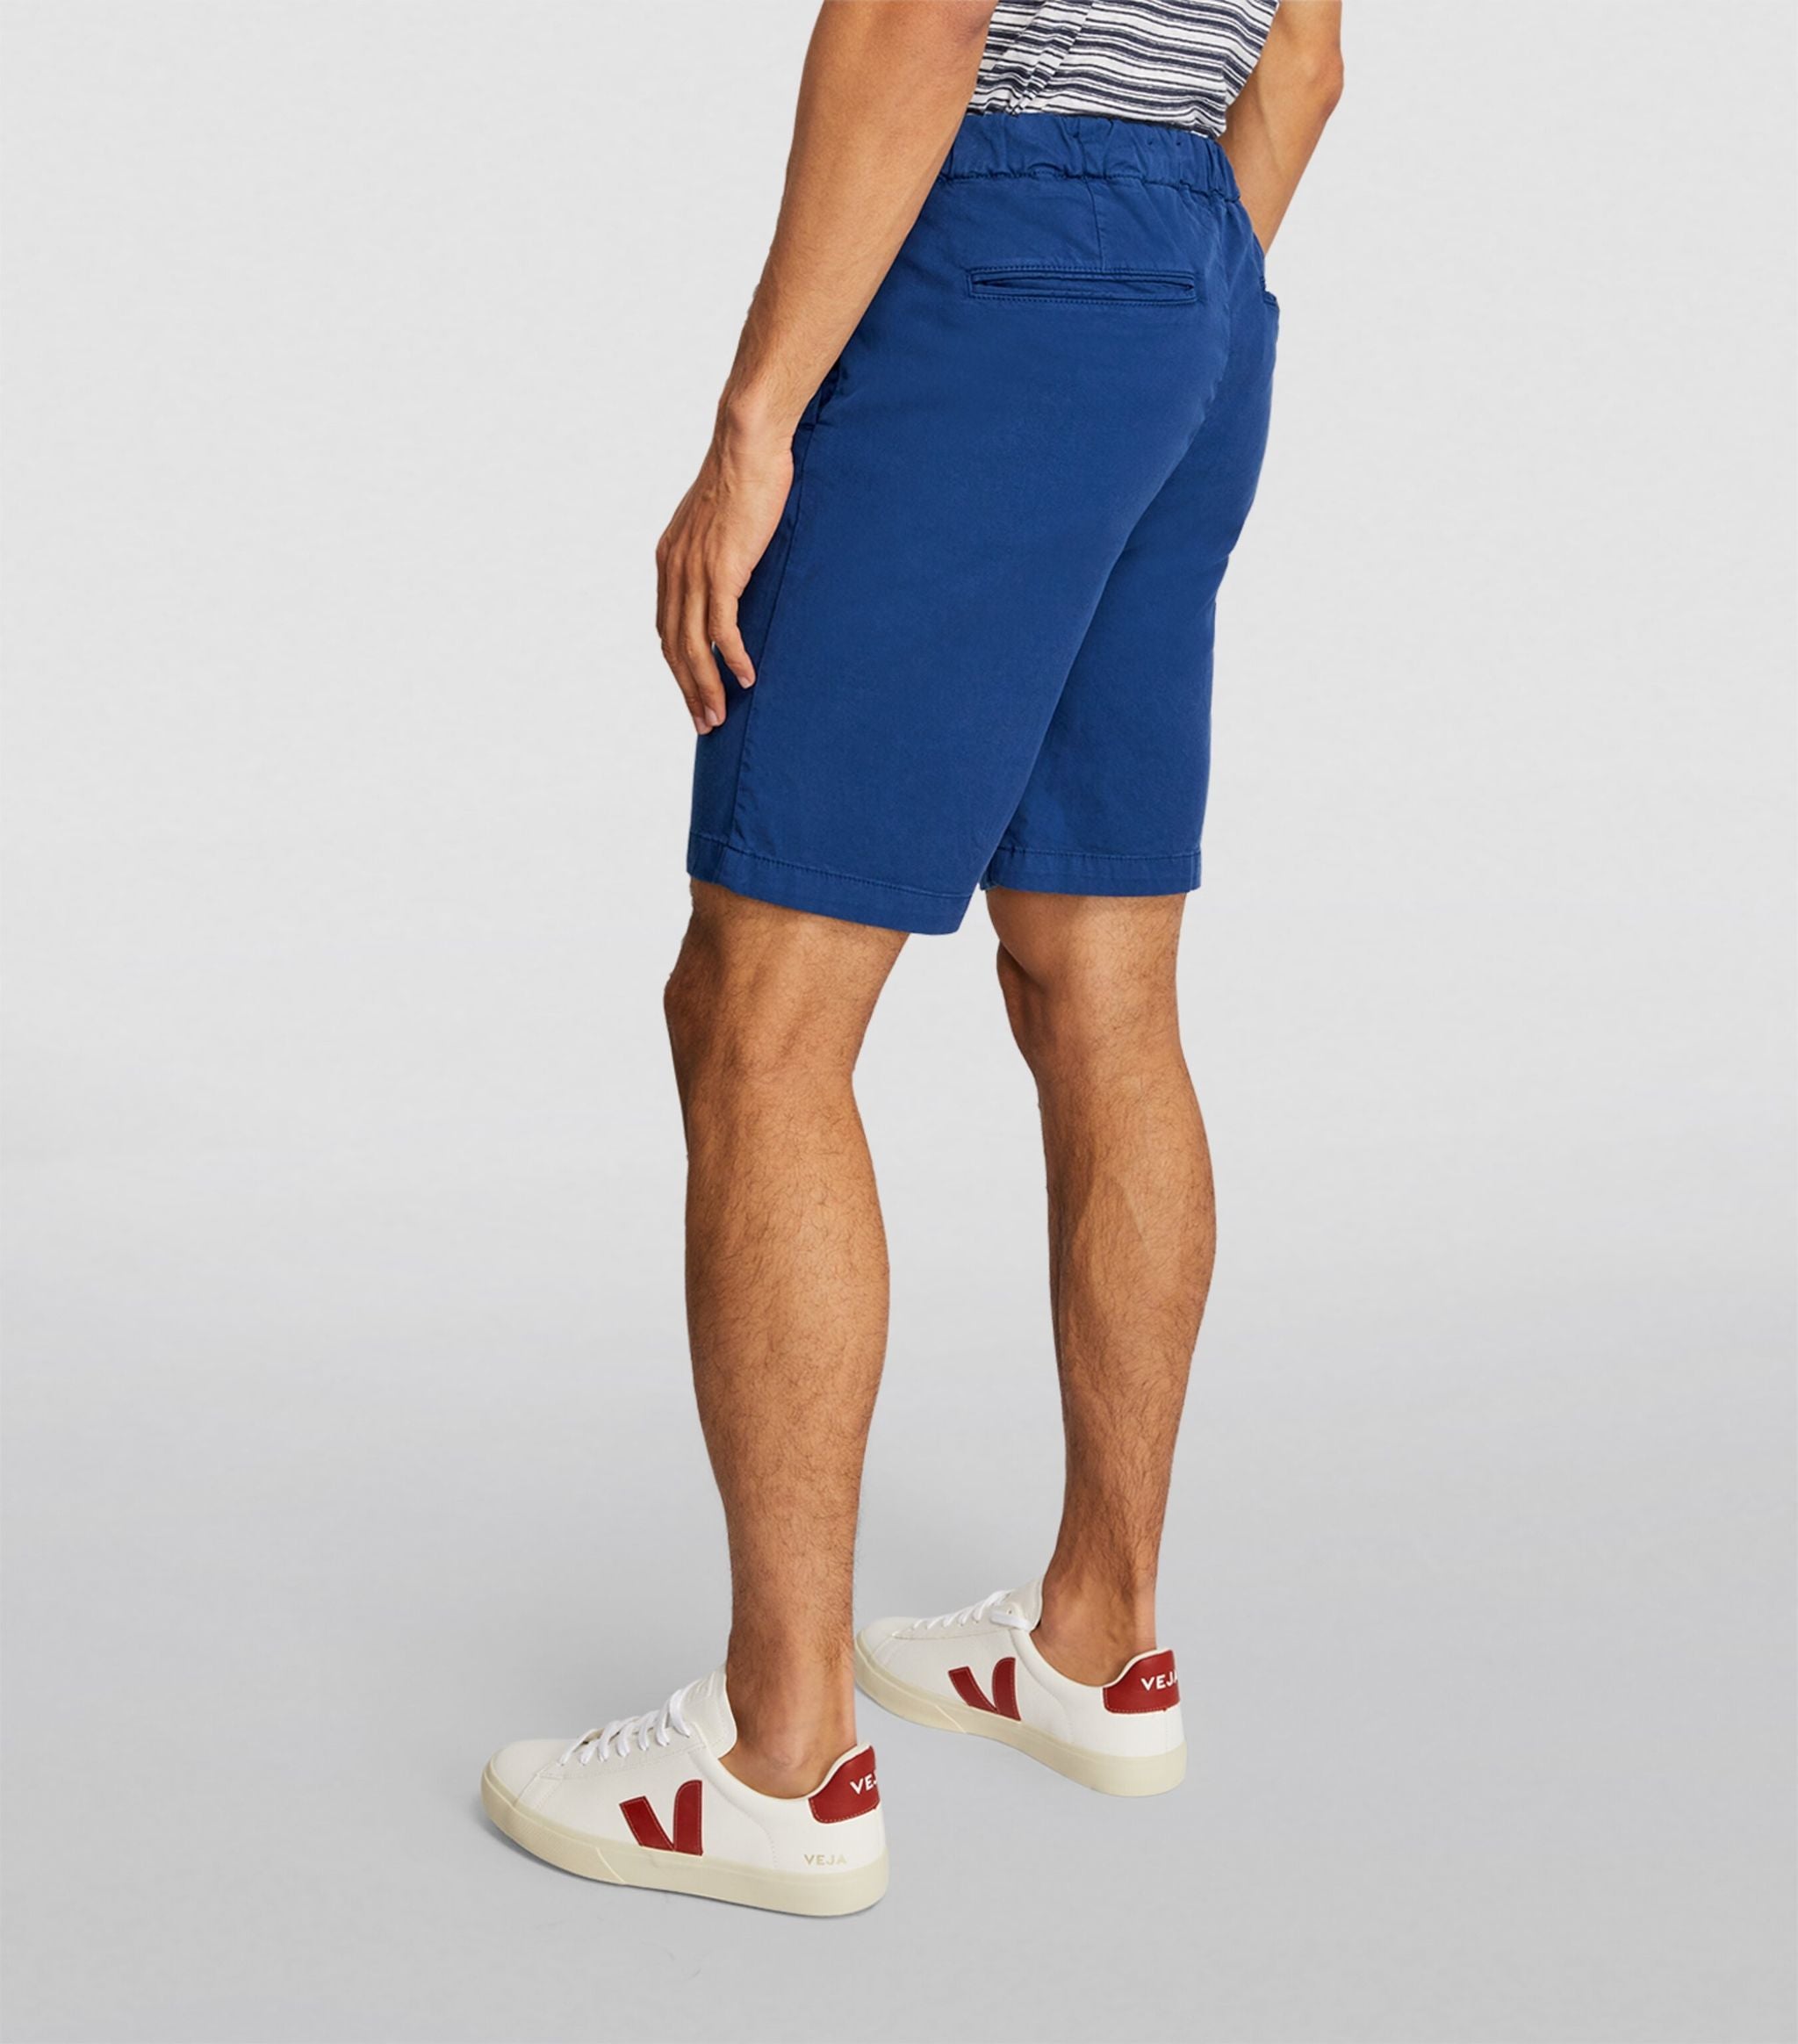 7 FOR ALL MANKIND - Electric Blue Weightless Jogger Shorts JSJSC230EI